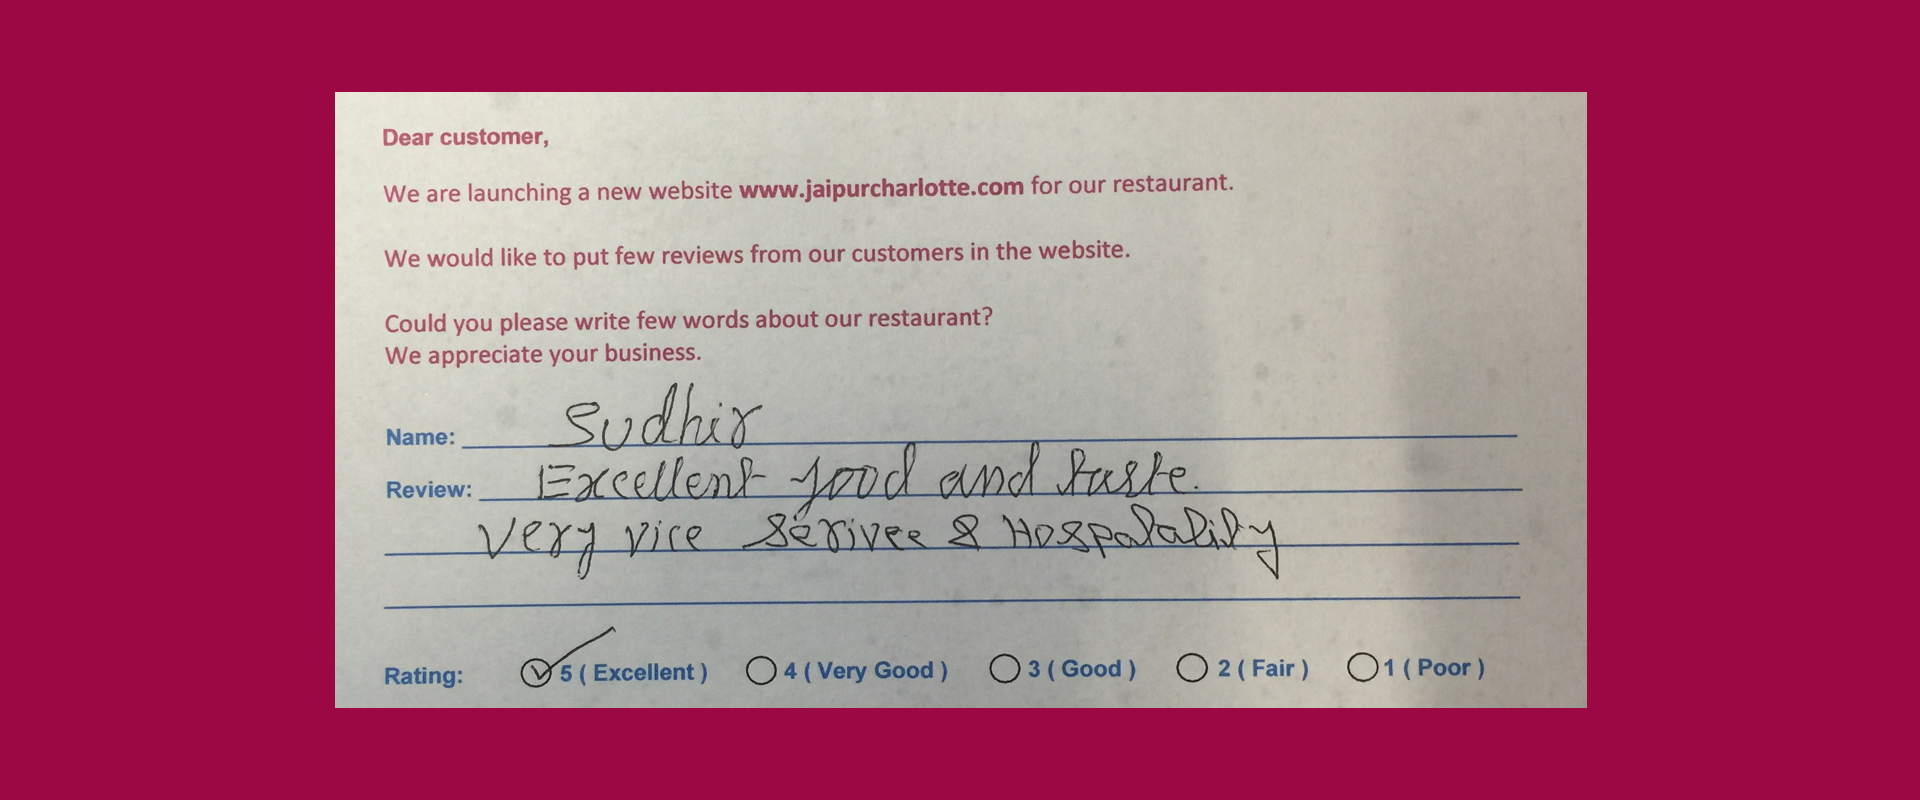 Jaipur Indian Restaurant Customer Review by Sudhir - Rating 5 out of 5